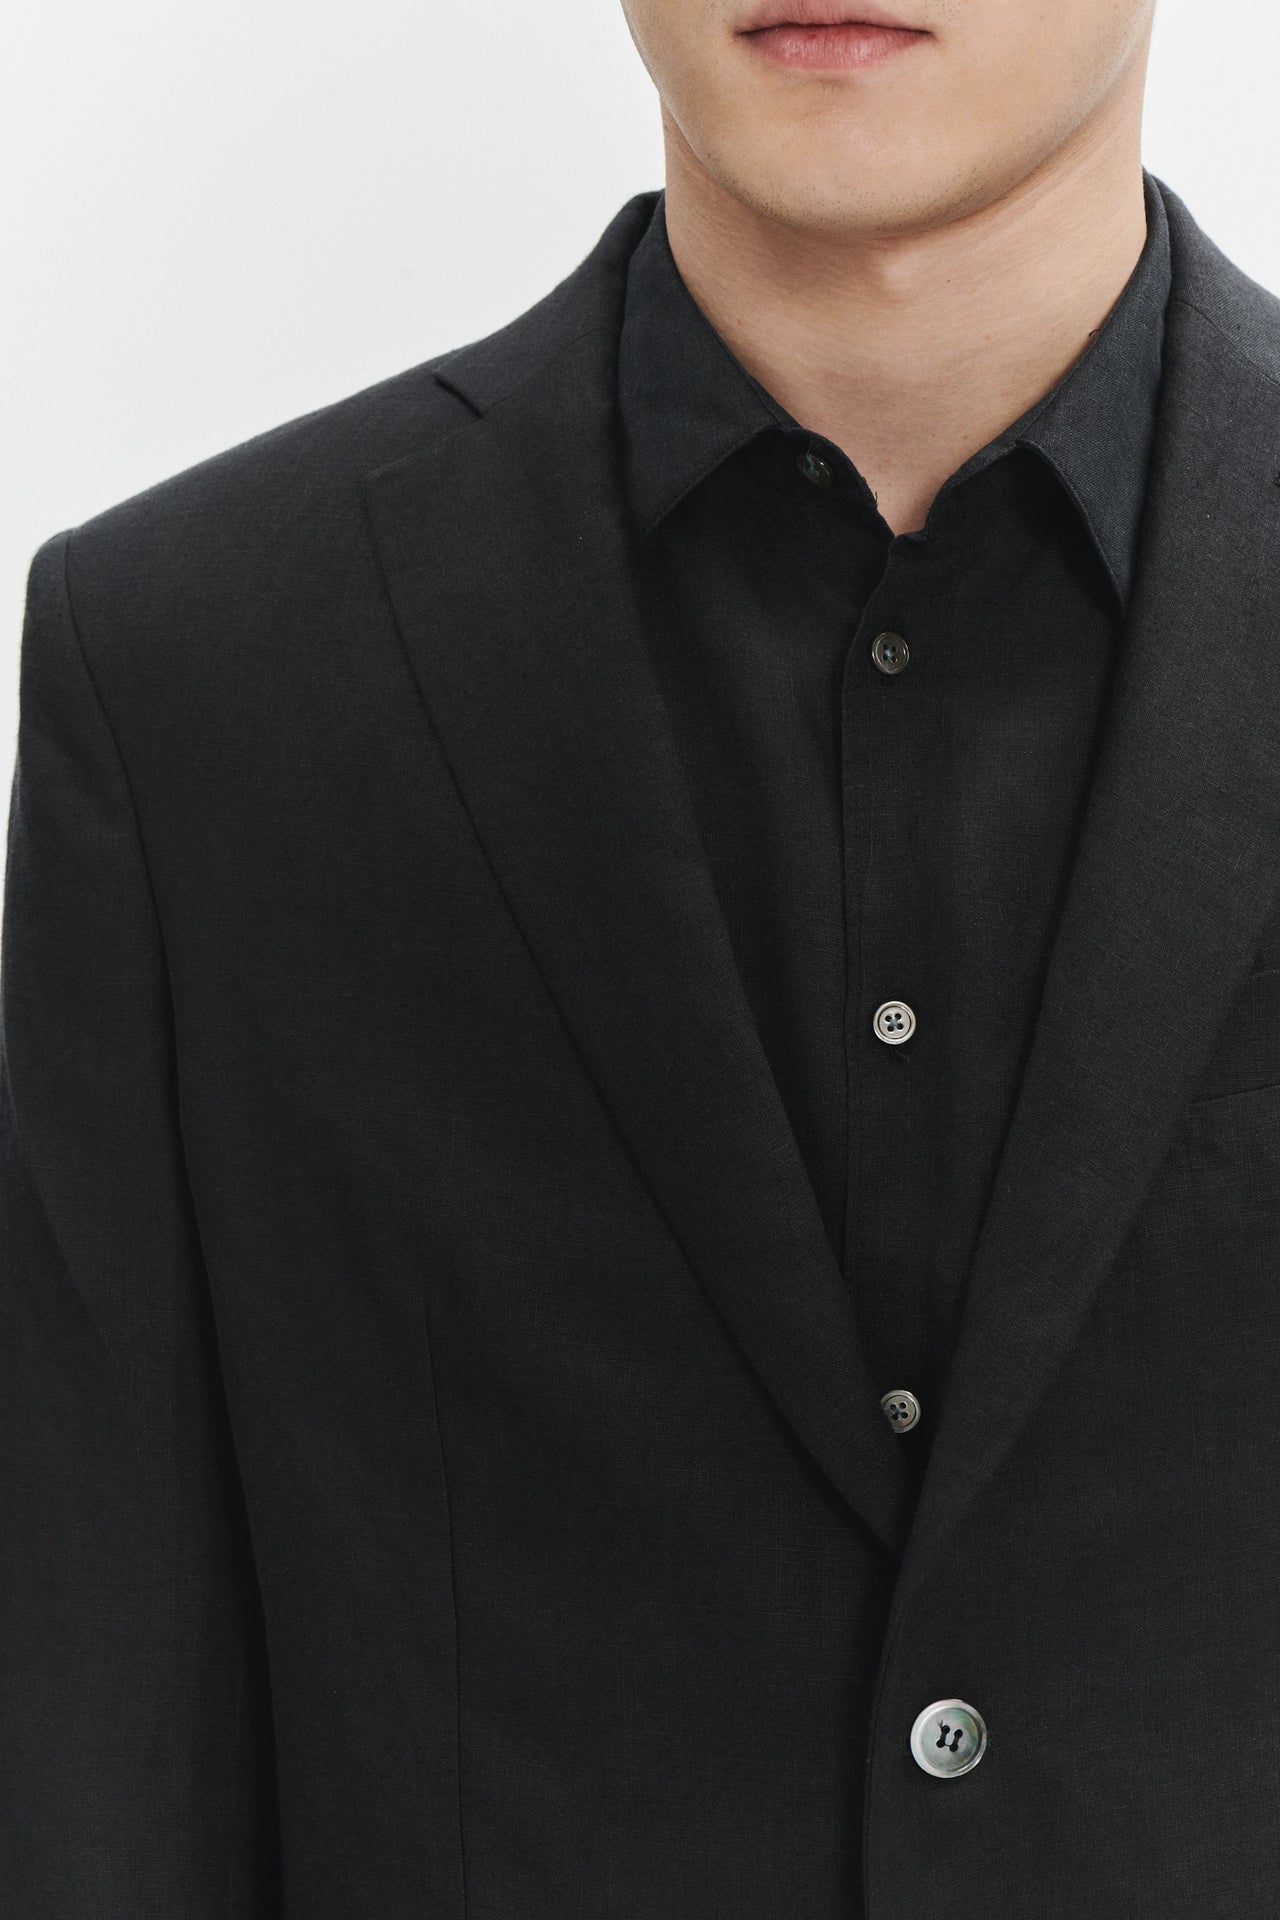 Relaxed Jacket in a Black Pure Linen with Cotton Lining